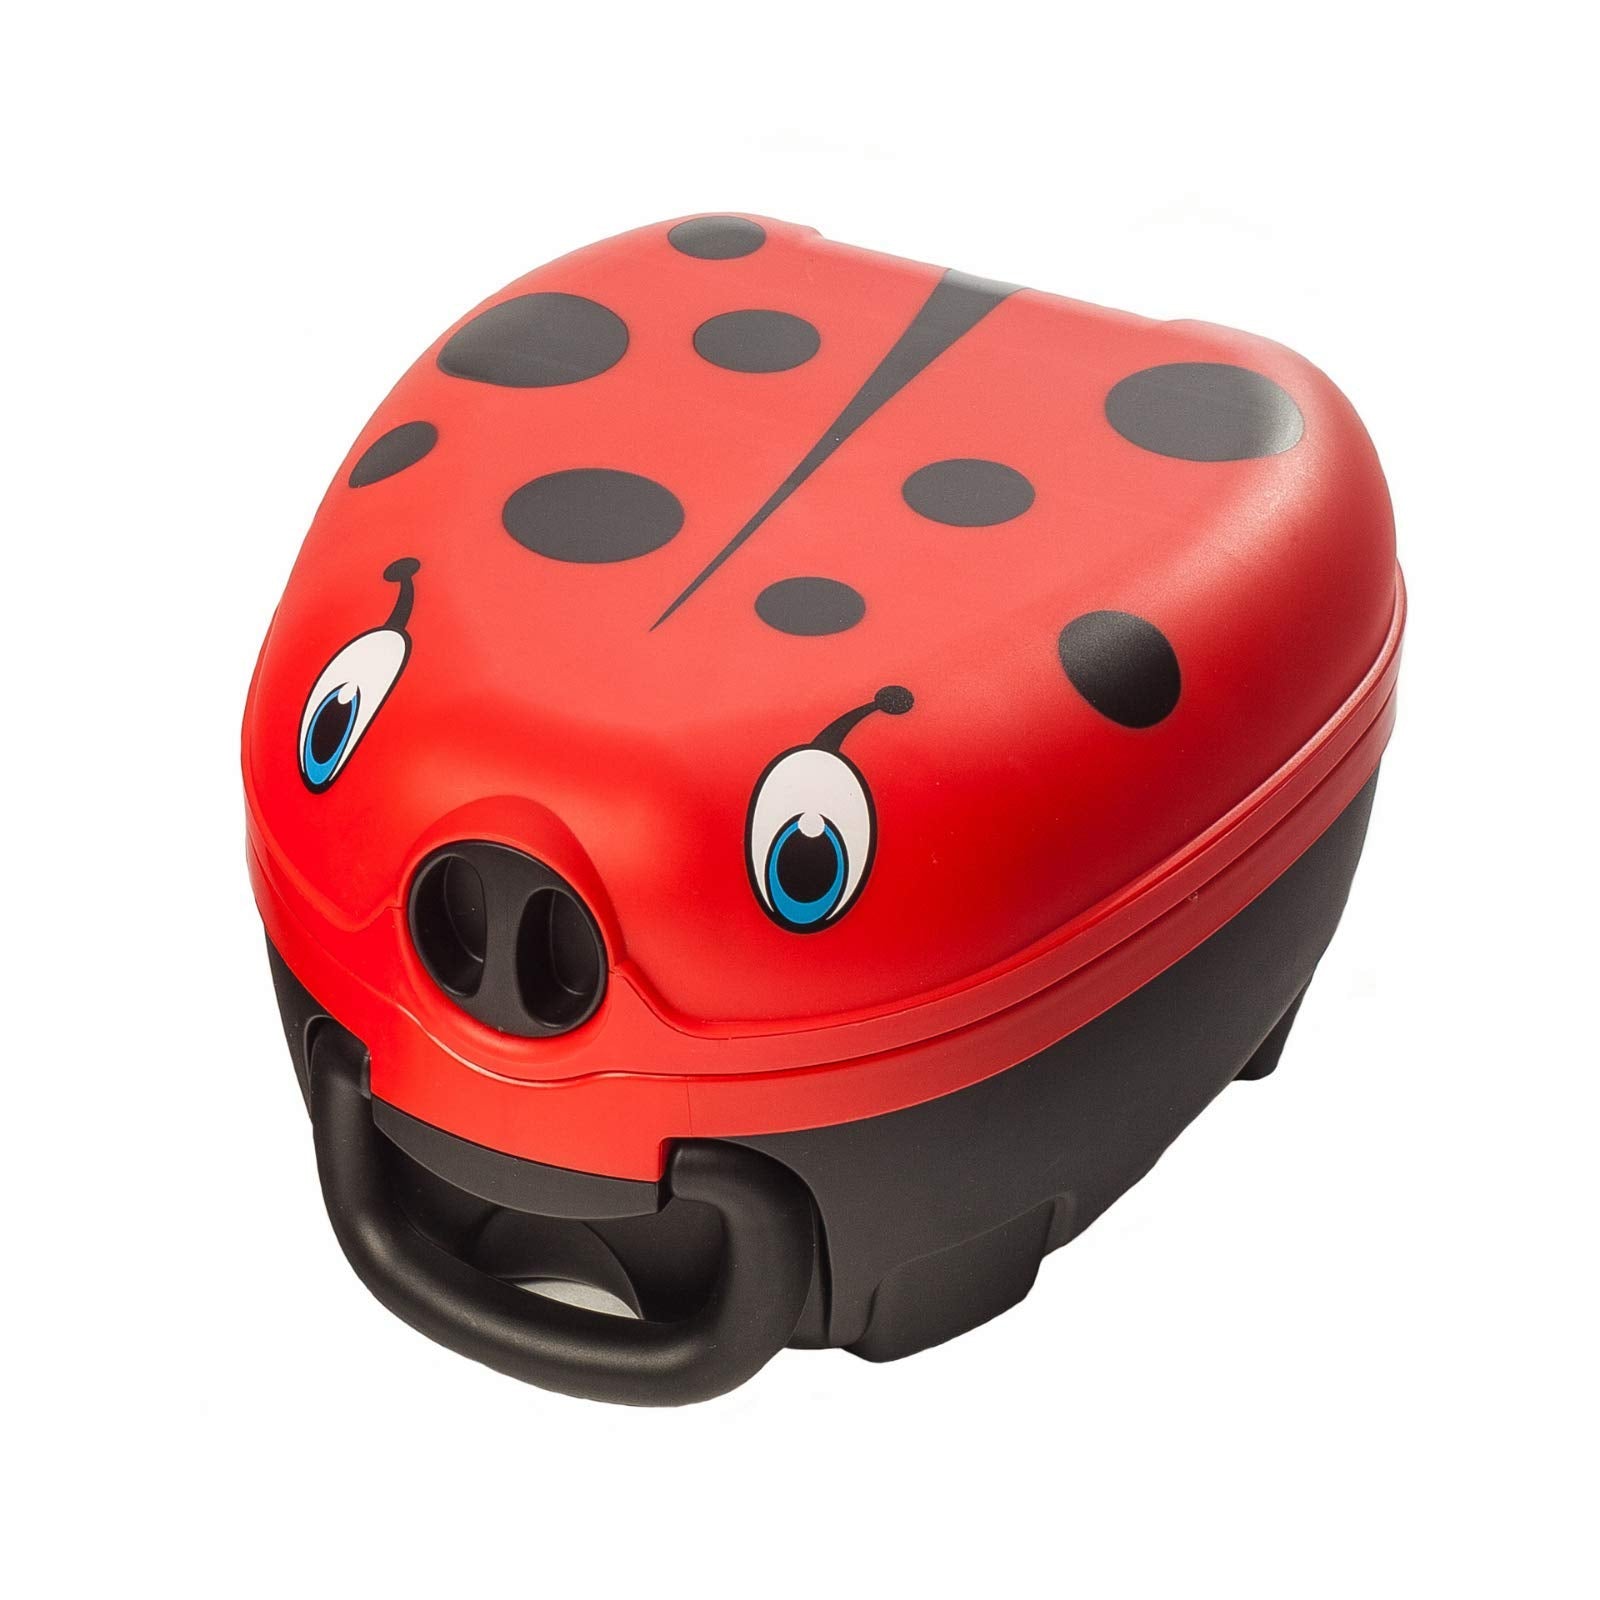 My Carry Potty - Ladybird Travel Potty, Award-Winning Portable Toddler Toilet Seat for Kids to Take Everywhere